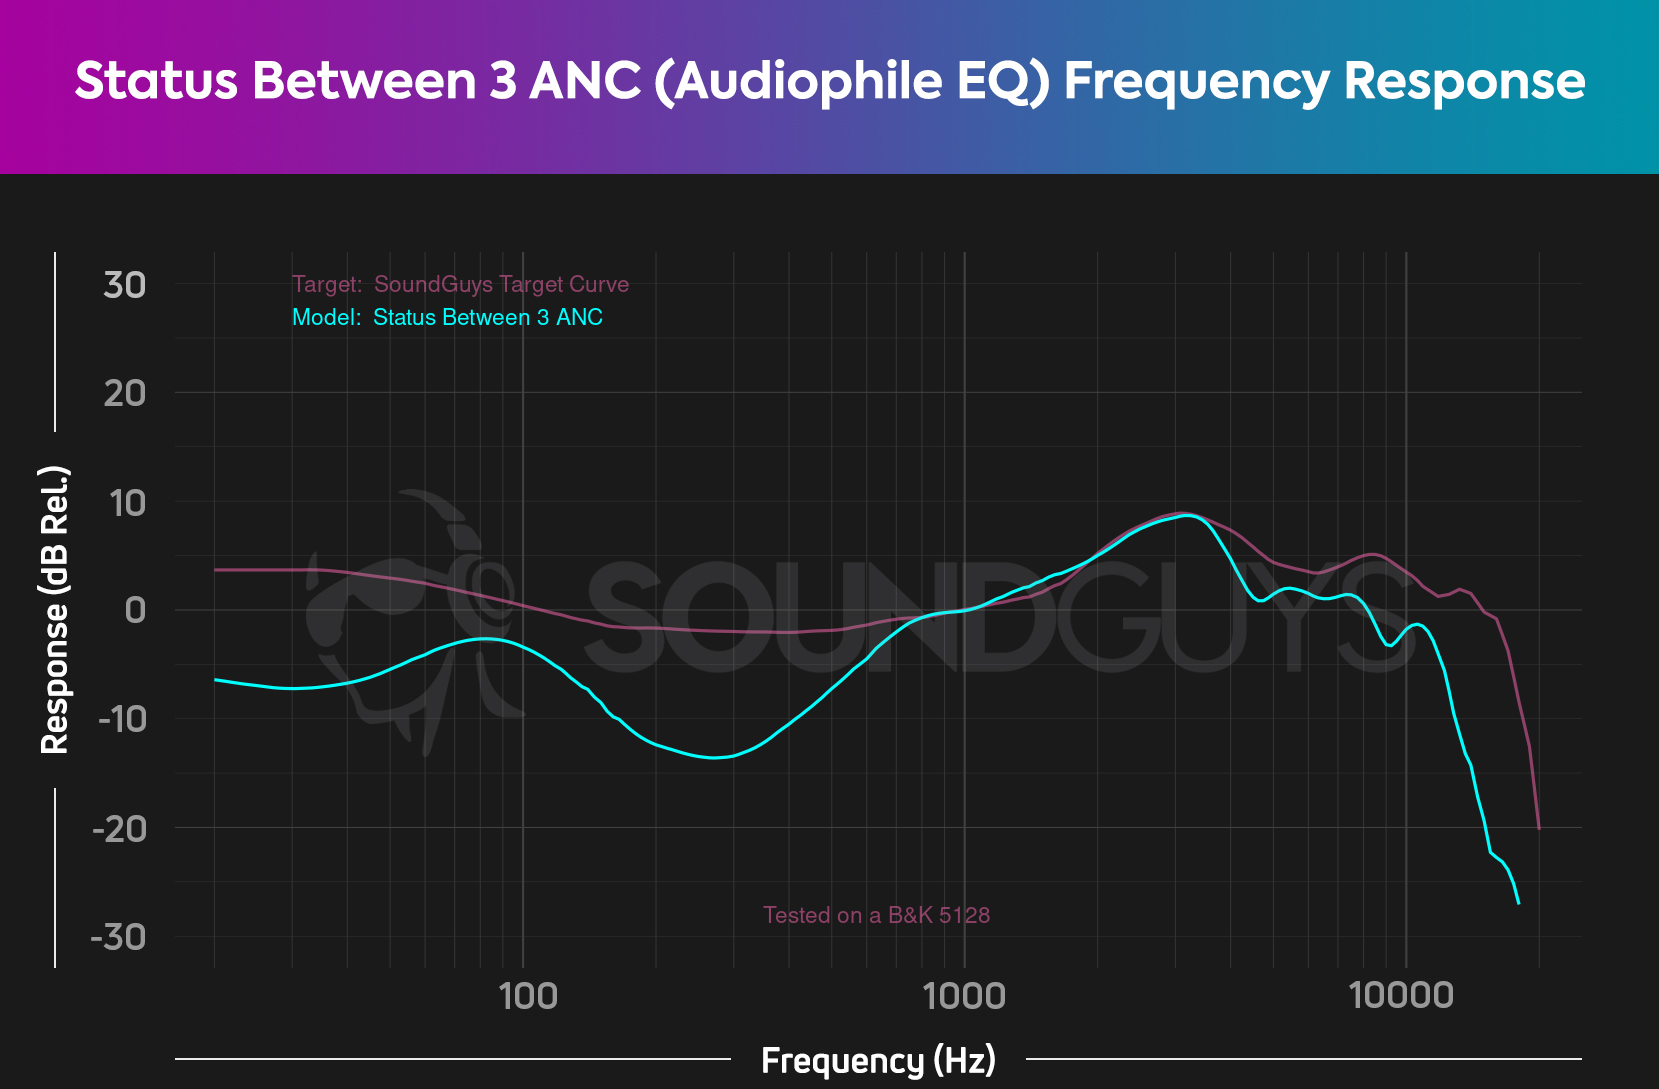 A frequency response chart shows the Status Between 3 ANC Audiophile EQ setting compared to the target curve.